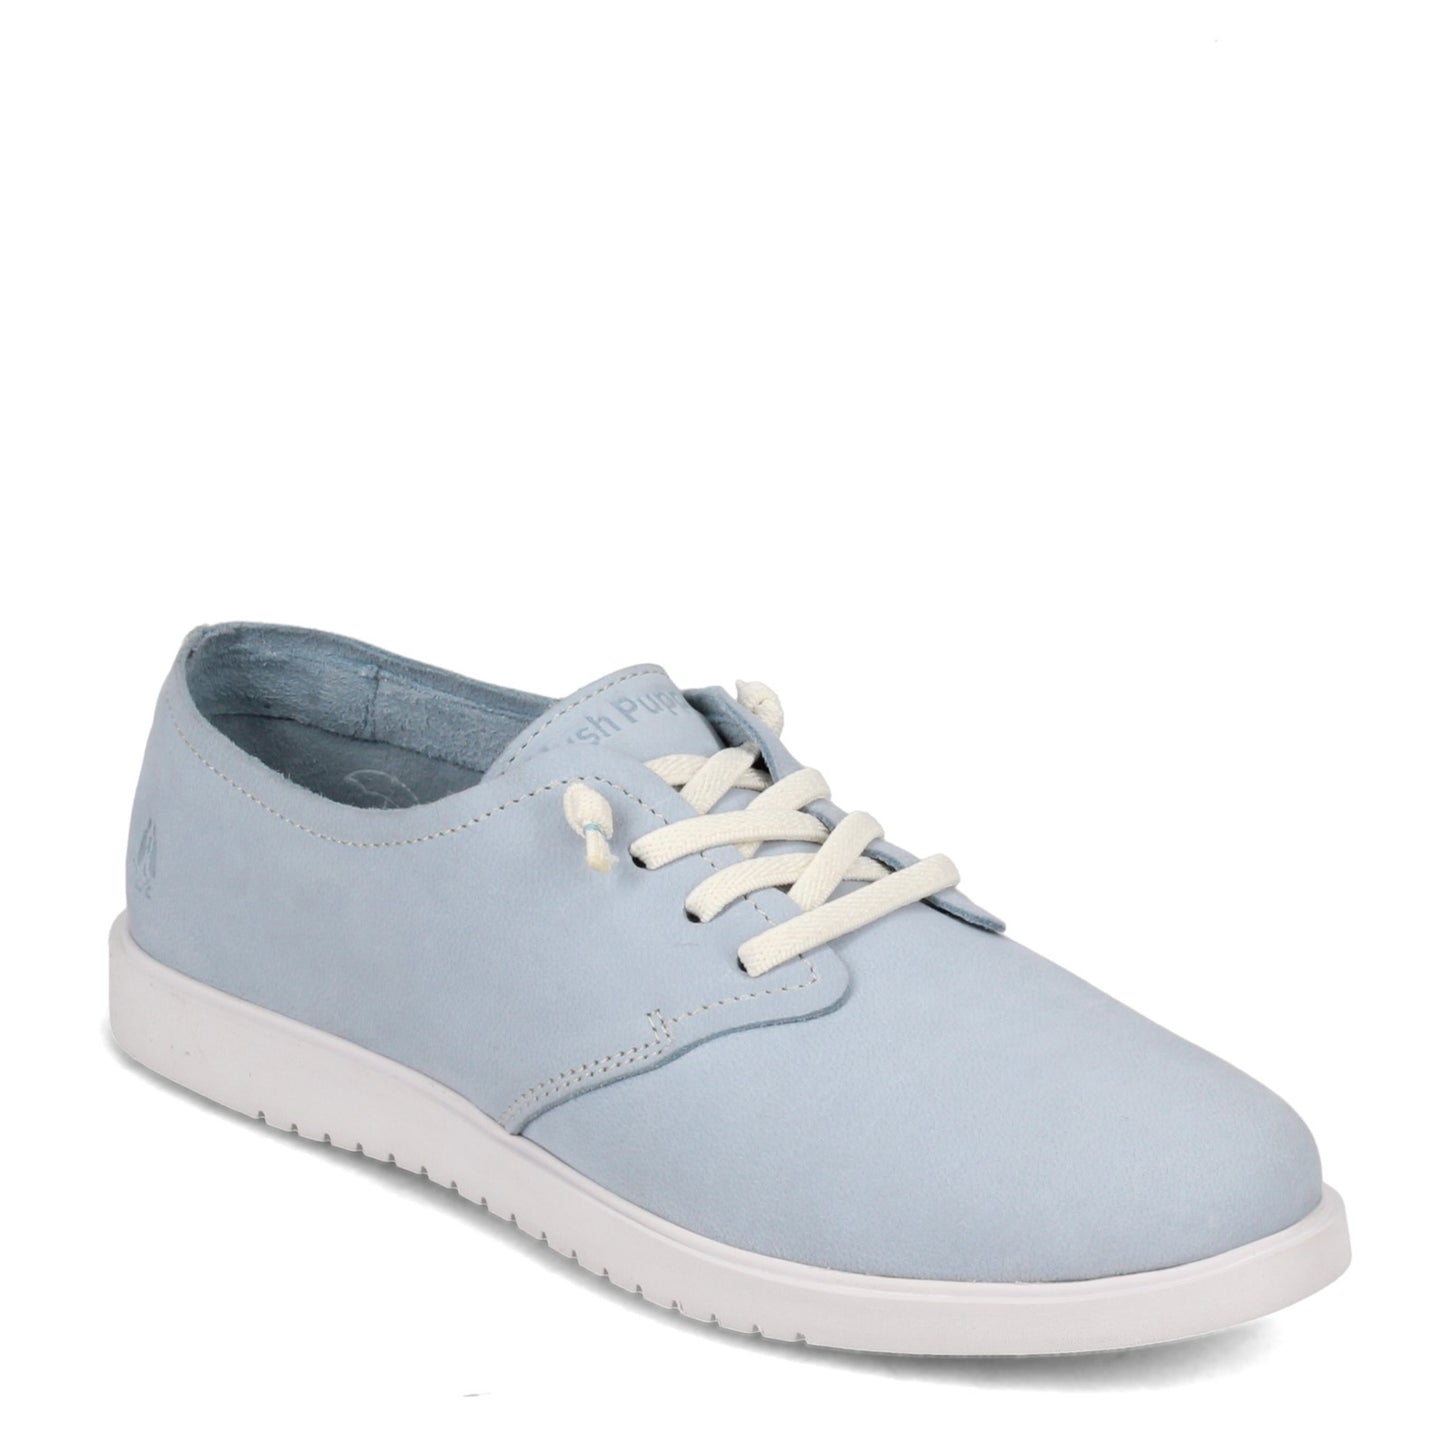 Peltz Shoes  Women's Hush Puppies The Everyday Lace-Up BLUE HW06751-427